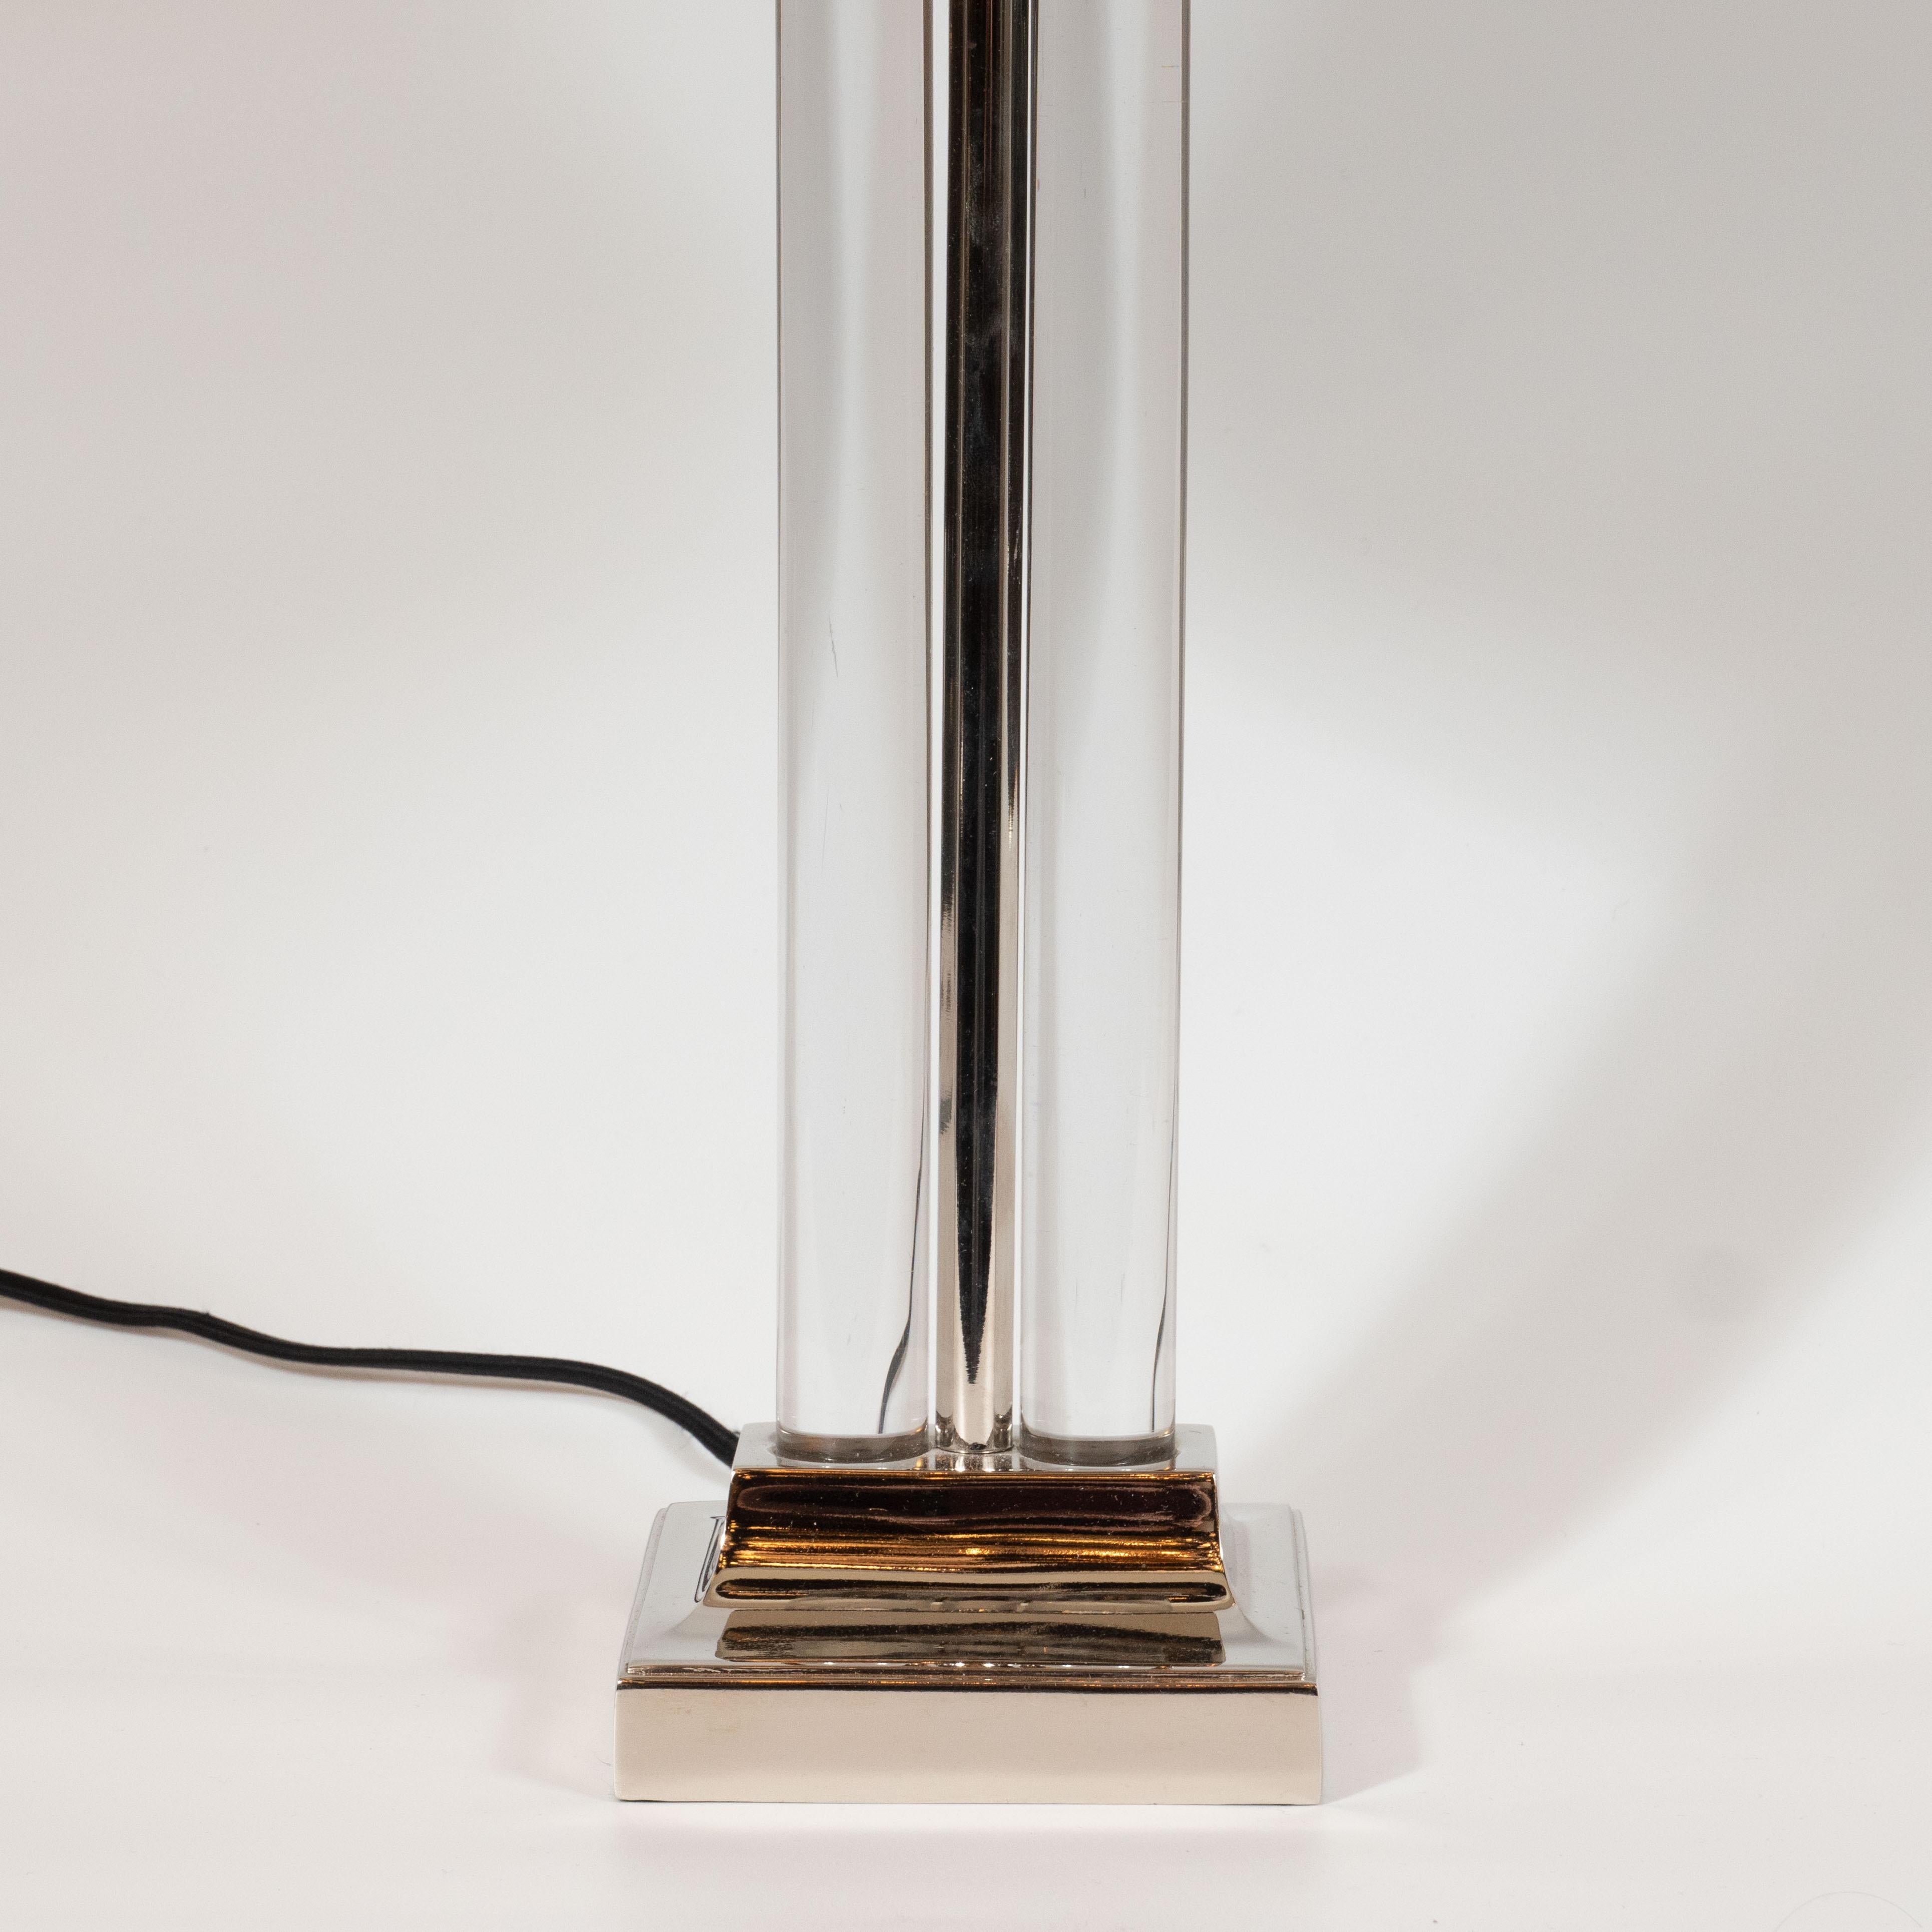 This elegant table lamp was designed by the esteemed Gilbert Rohde- one of the pioneers of Modern design in America- for MSLC circa 1940. It features a tiered nickel base with a cylindrical column rising from the center flanked by two translucent